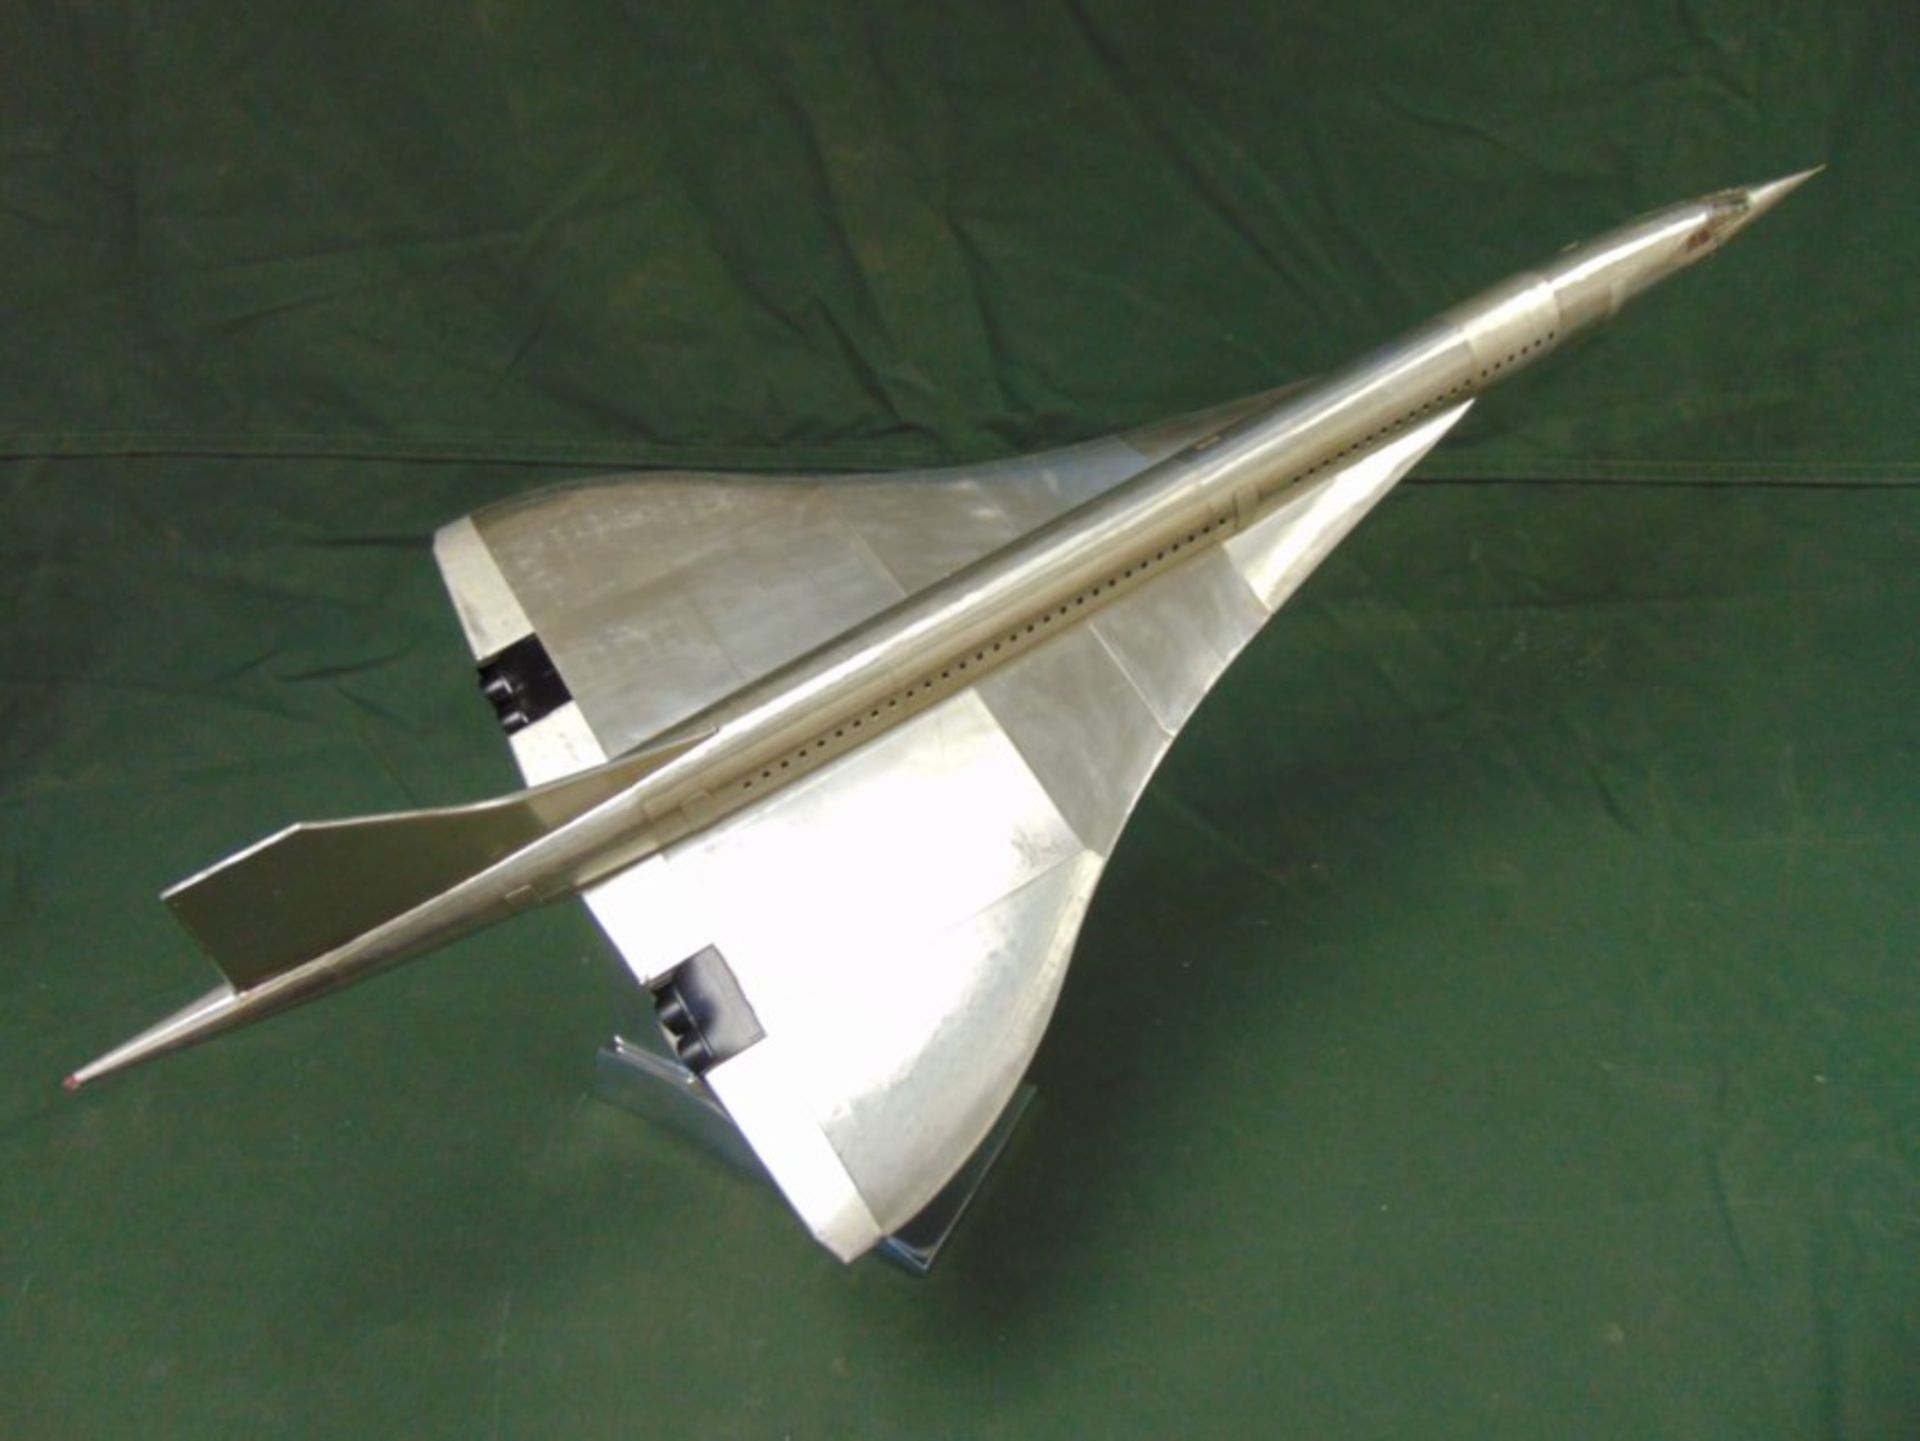 NEW JUST LANDED Large Aluminium Concorde Model - Image 4 of 14